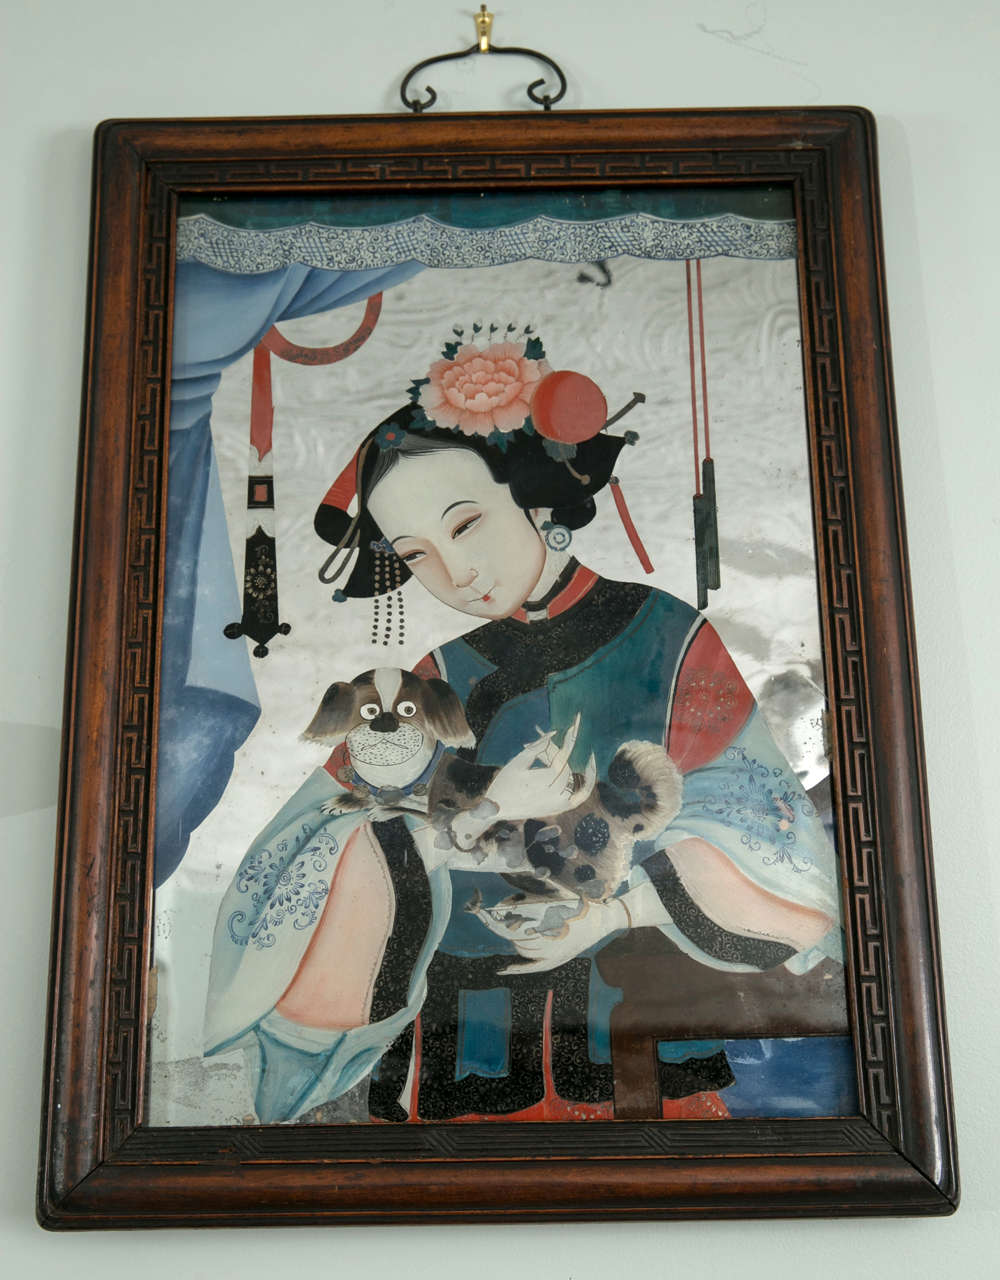 Pair of Chinese Eglomise Portraits of 2 Ladies Late 19th Century. Original Wood Frame